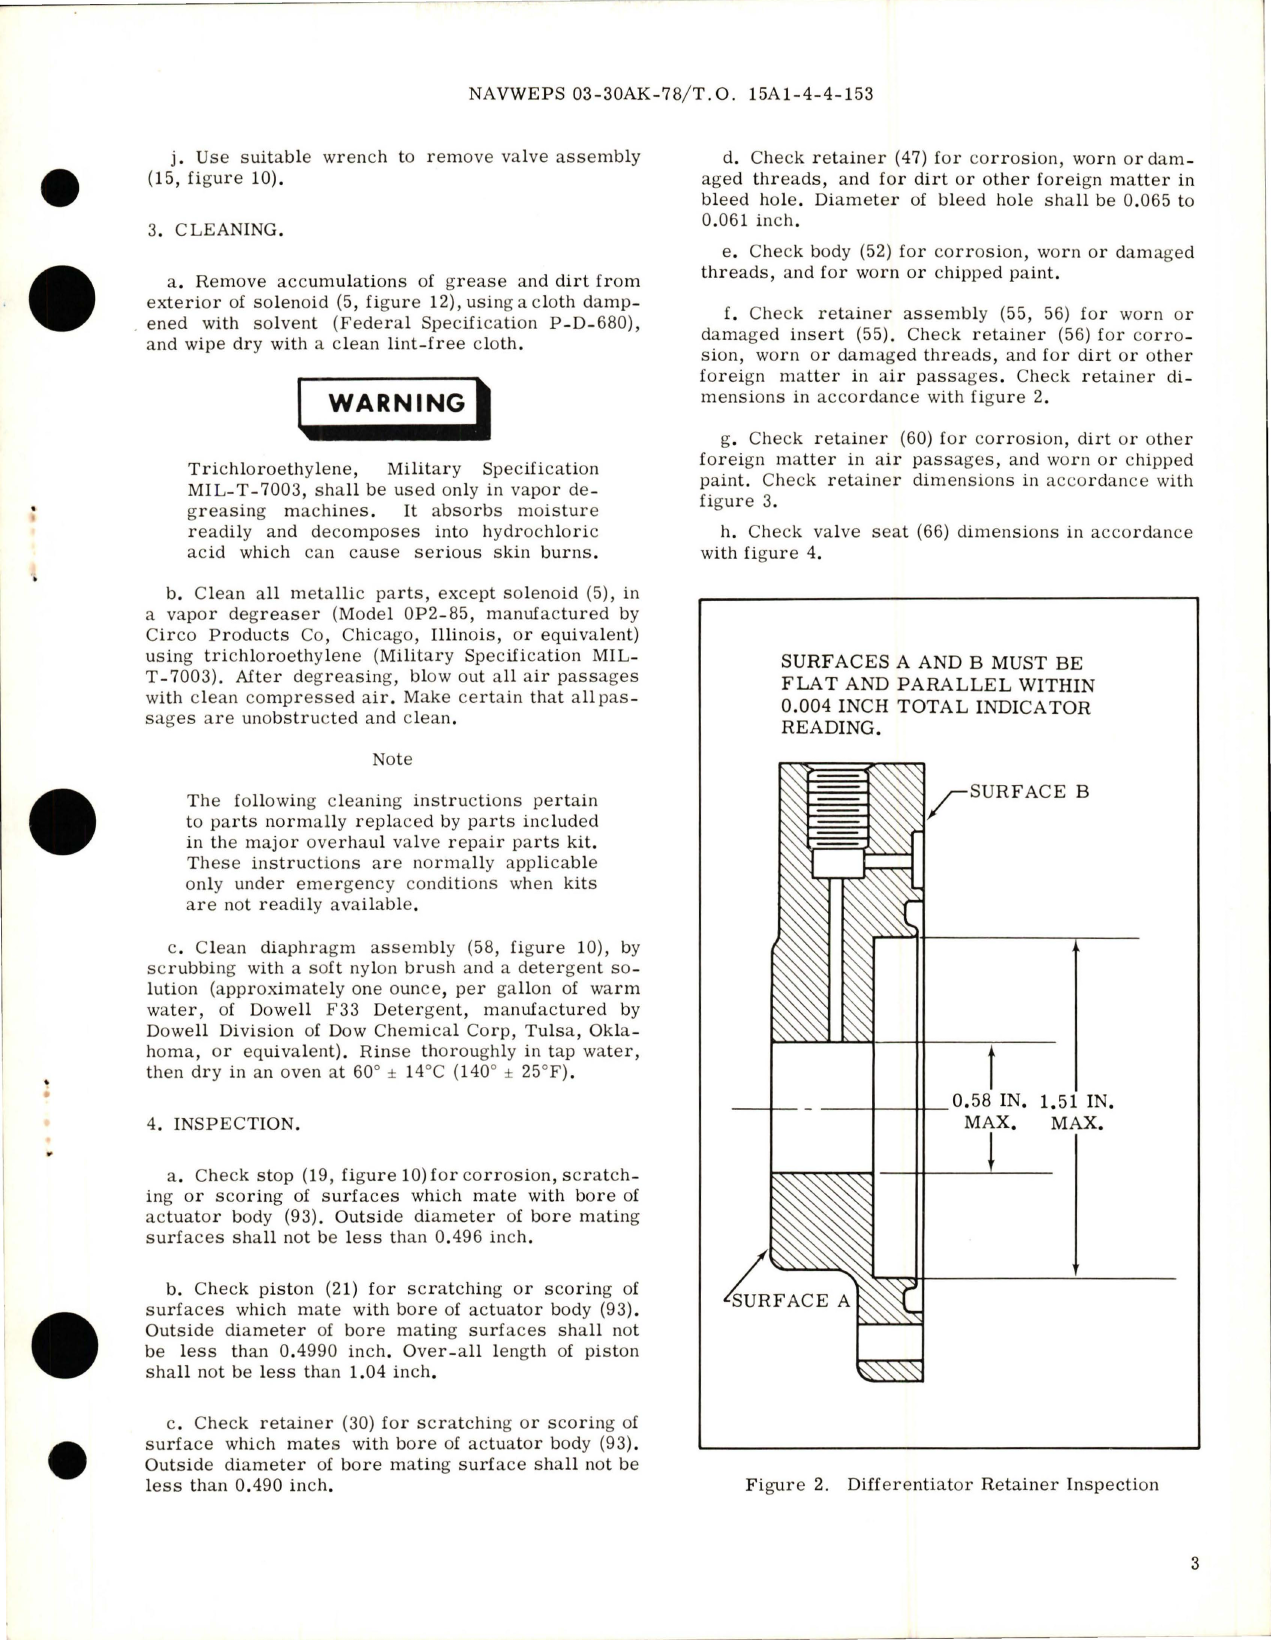 Sample page 5 from AirCorps Library document: Overhaul Instructions with Parts Breakdown for Shutoff Differential Pressure Regulator - 2